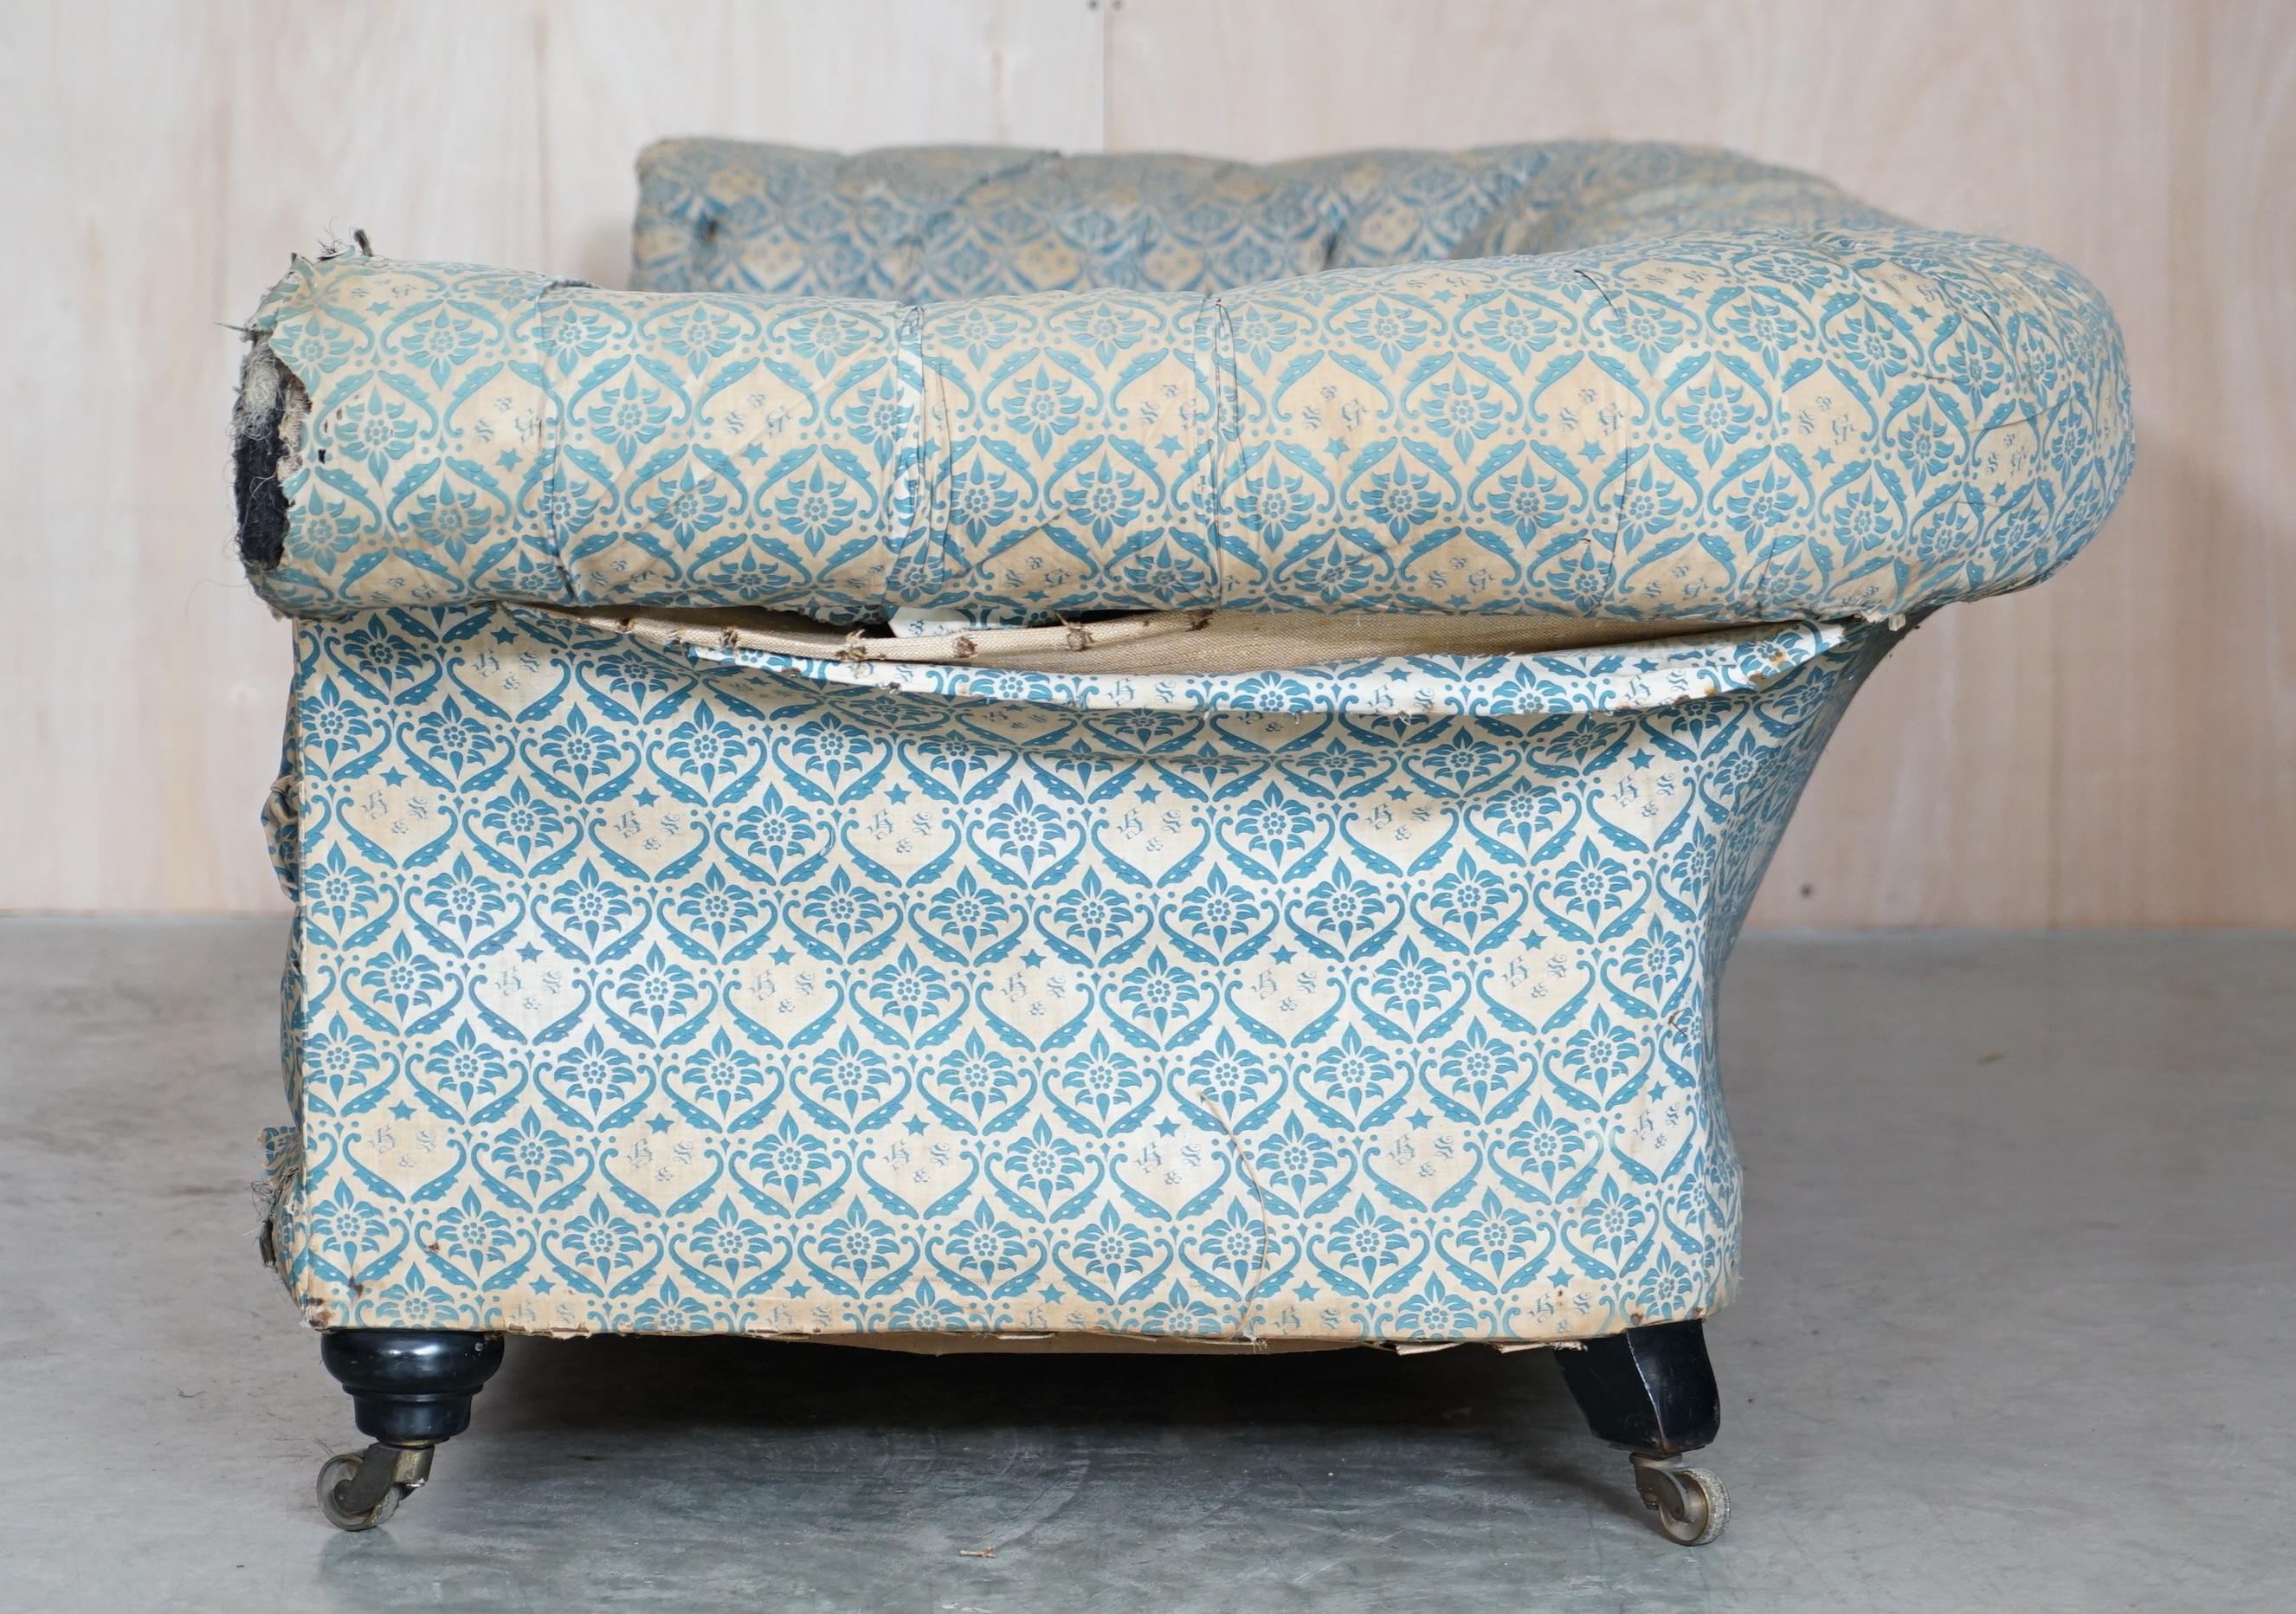 Unrestored Antique Victorian Howard & Son's Chesterfield Sofa Inc Ticking Fabric For Sale 11